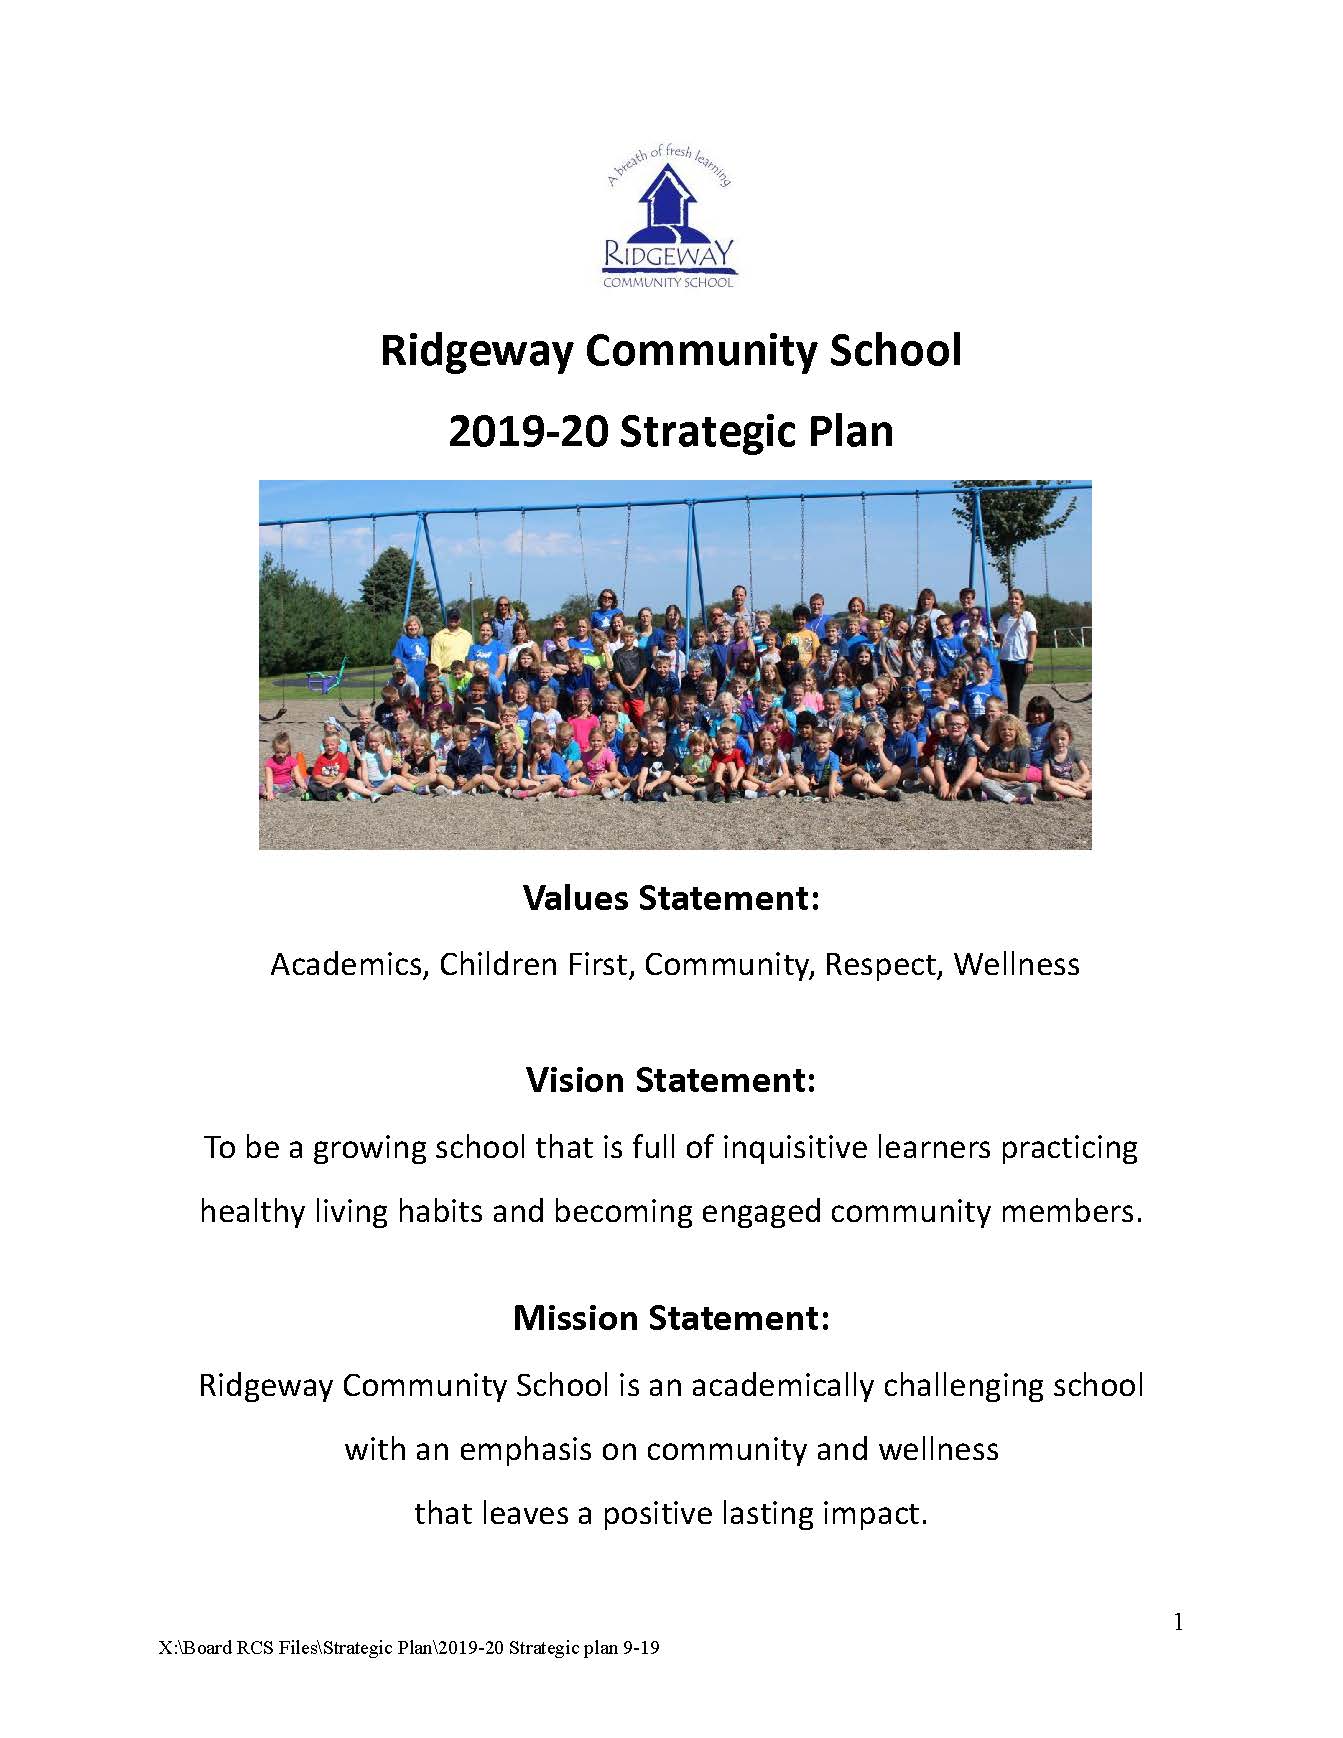 Cover of the 2019-20 Strategic Plan